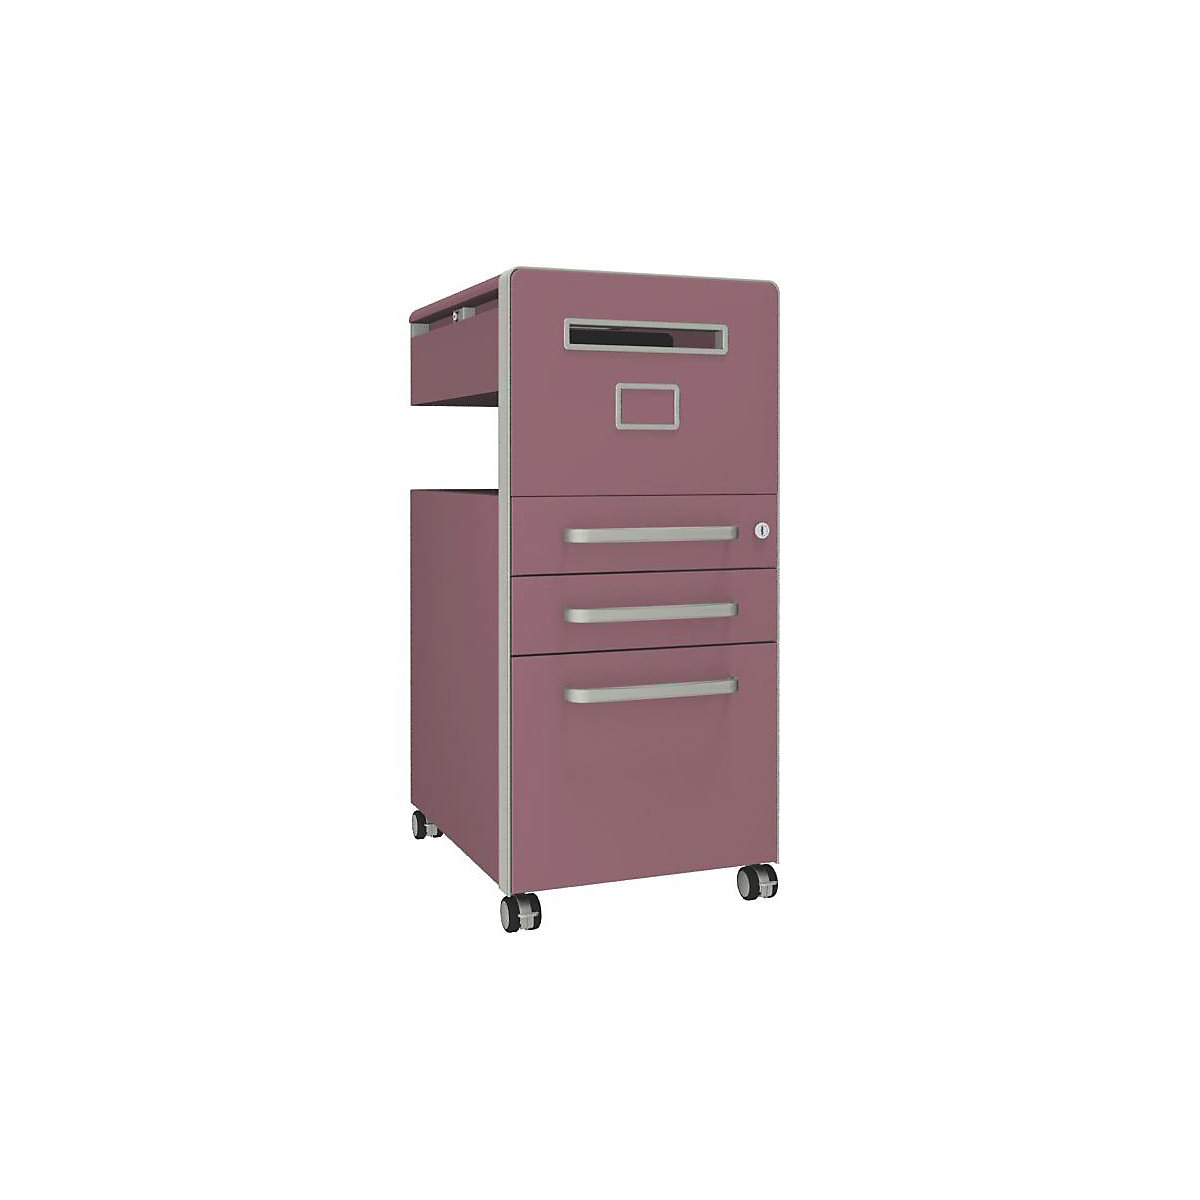 Bite™ pedestal furniture, with 1 whiteboard, opens on the right side – BISLEY, with 2 universal drawers, 1 suspension file drawer, pink-17